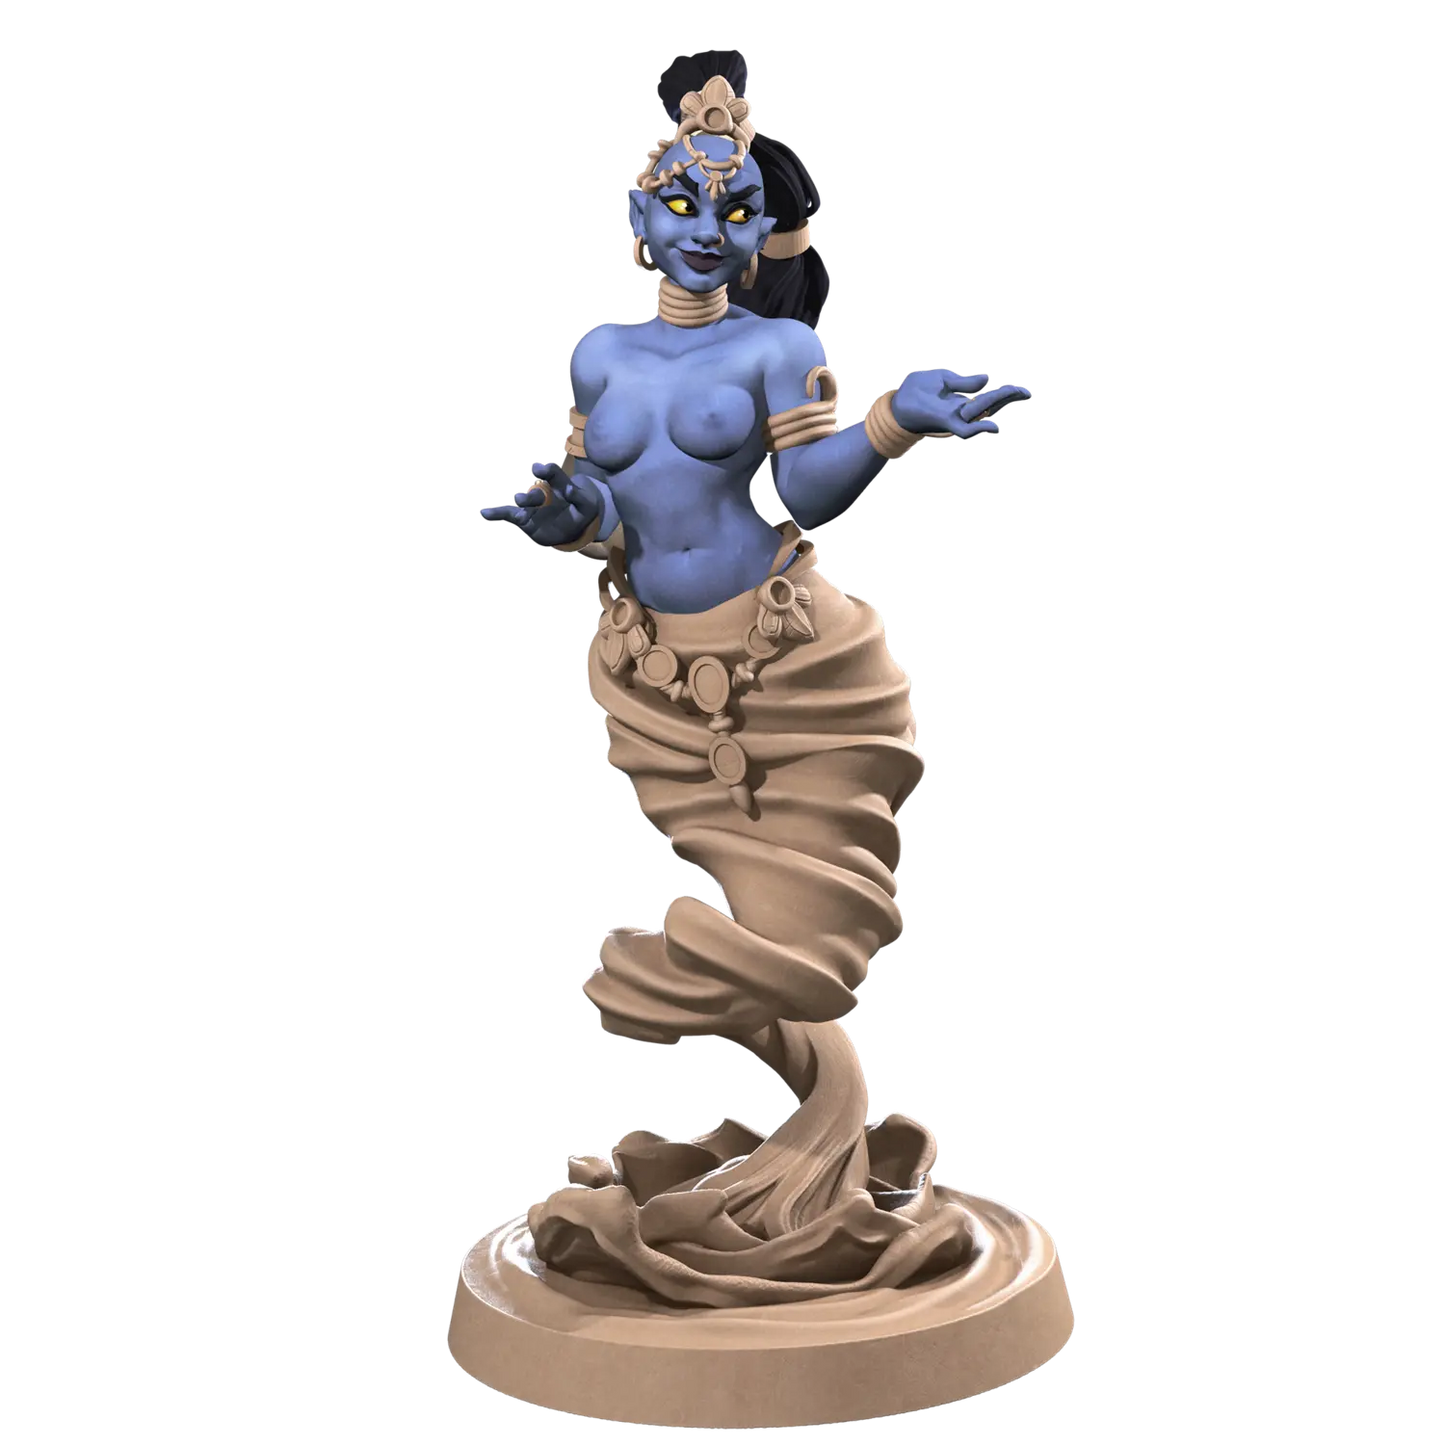 DnD Elementals - Miniature - Monsters - nsfw Jasmine, Air Djinn 02 NSFW Elementals - Miniature - Monsters - nsfw sold by DoubleHitShop